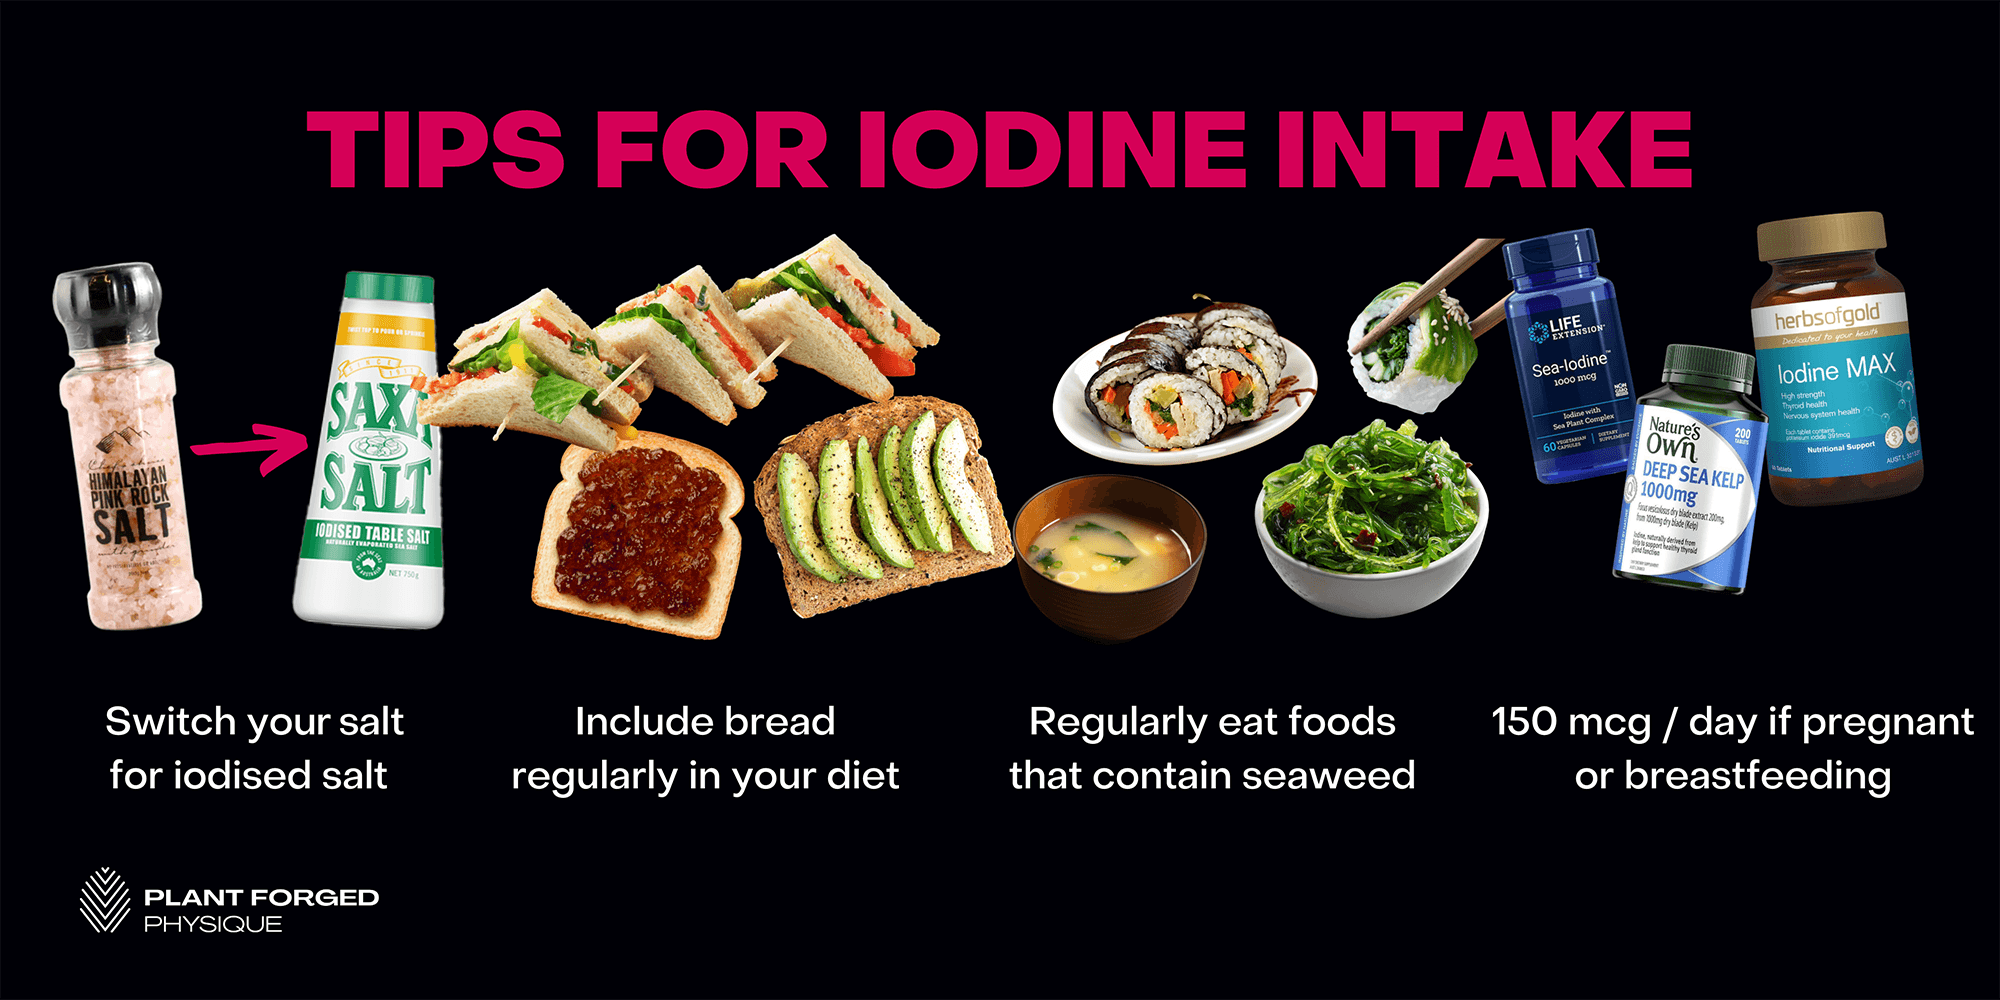 Tips for iodine intake